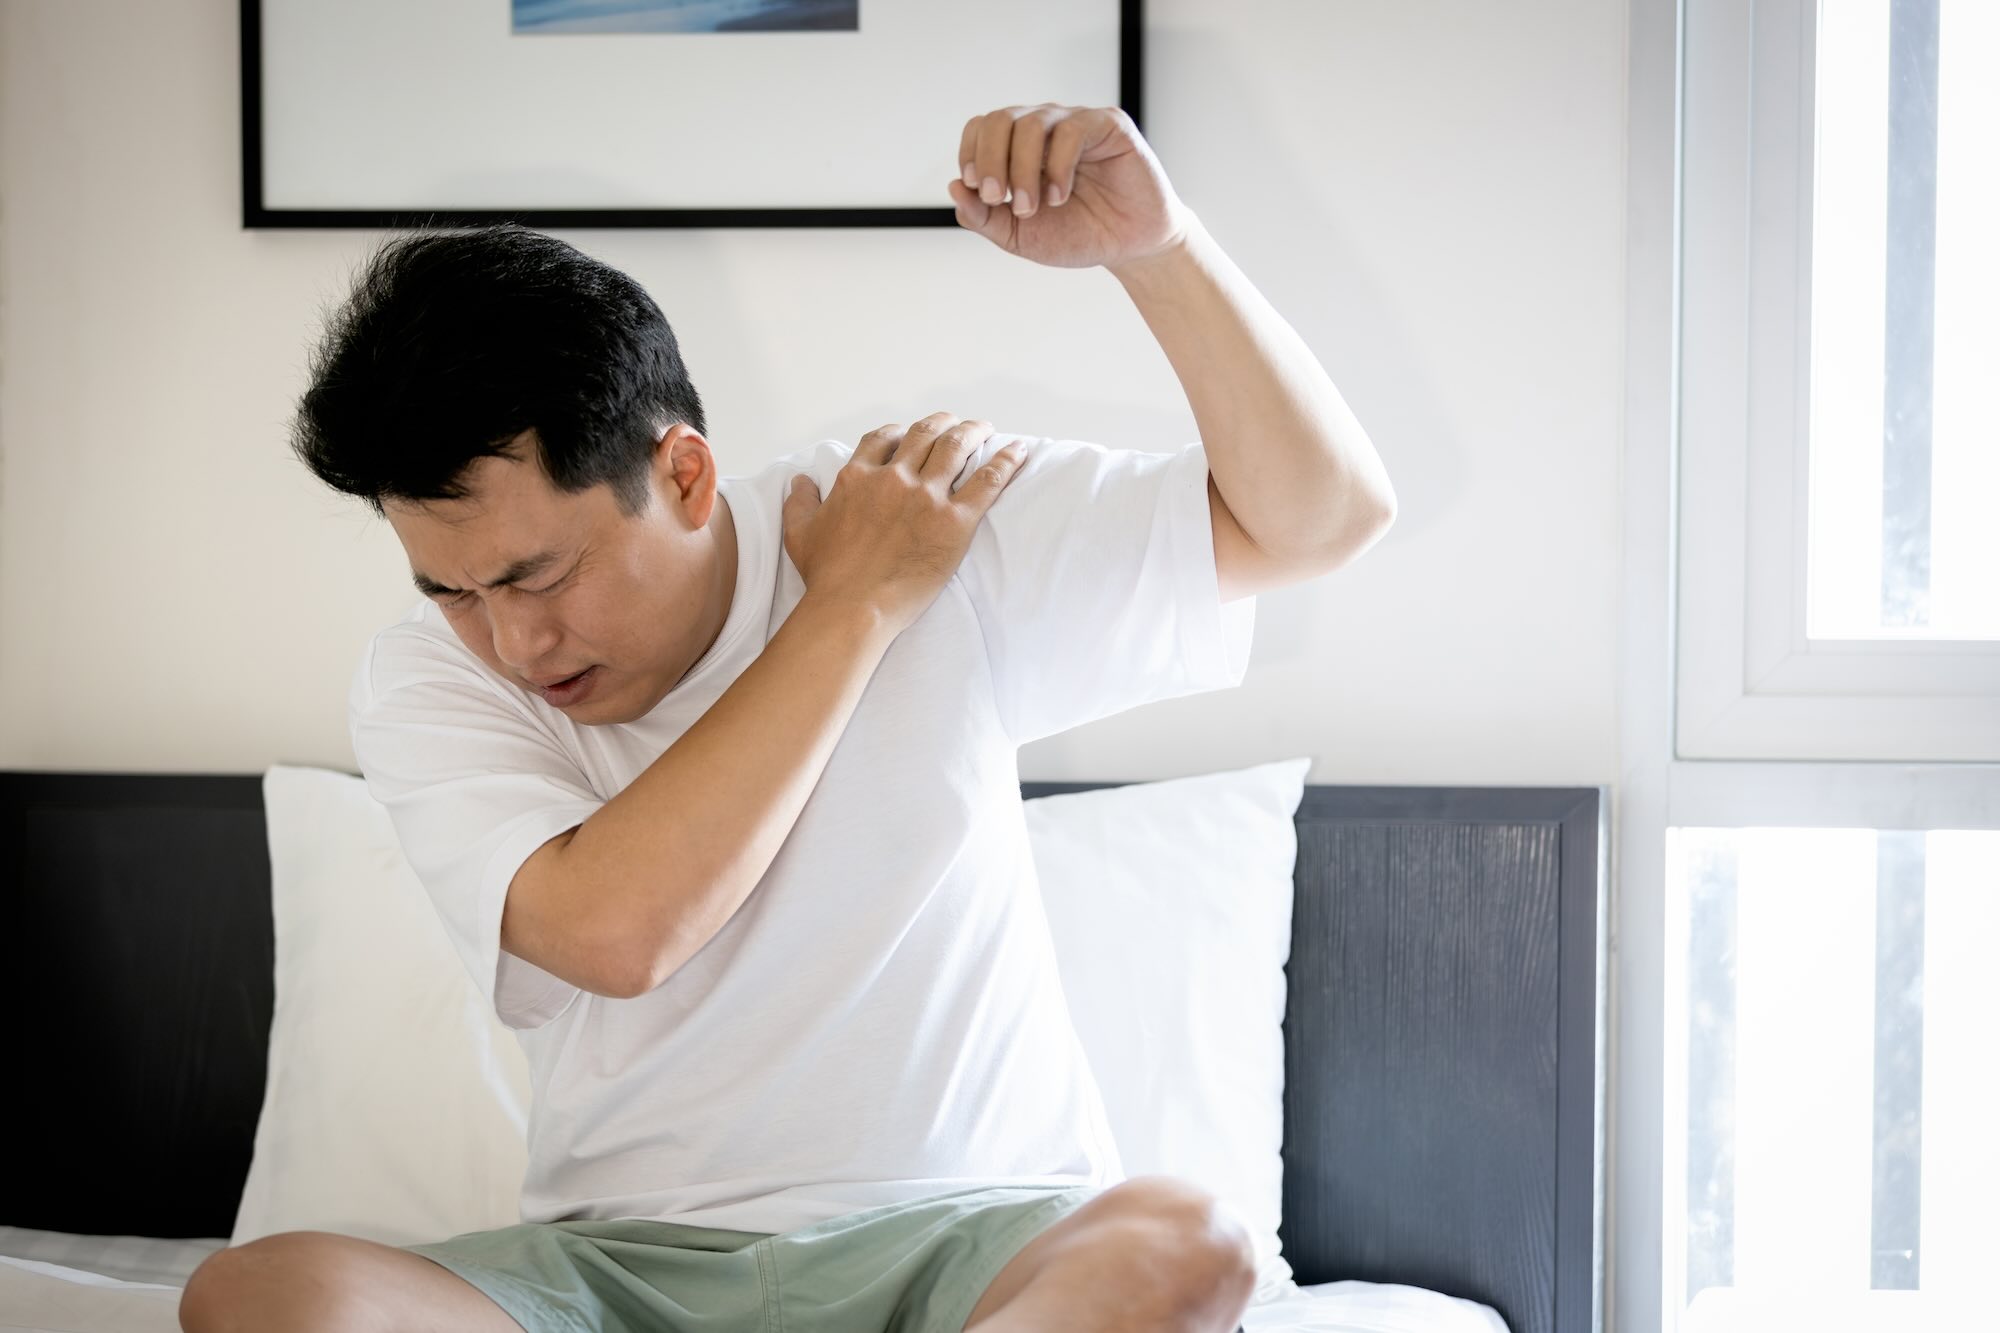 Paul Kirtisis, MD, walks through what Causes Shoulder Instability.